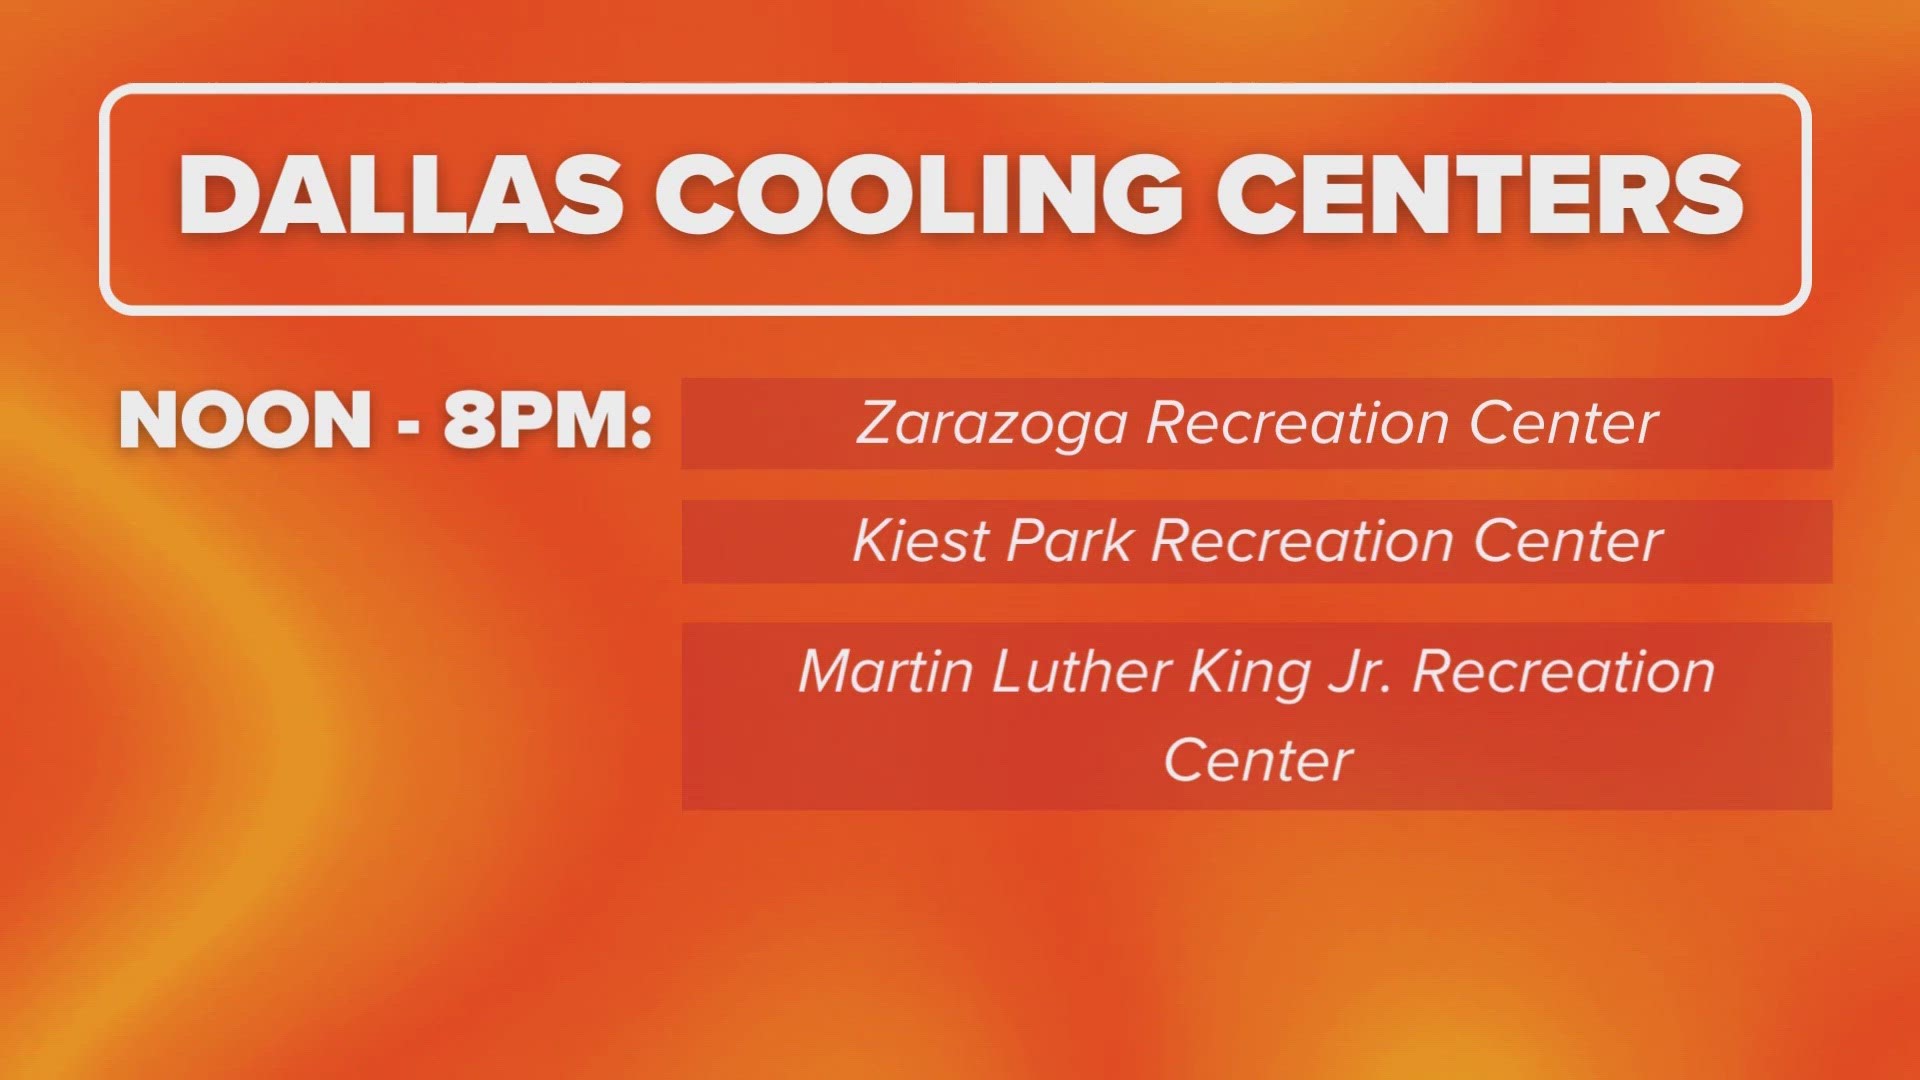 The city said it will activate Temporary Inclement Weather Cooling Centers (TIWCC) Sunday, Aug. 13 as proactive measures to safeguard the well-being of residents.